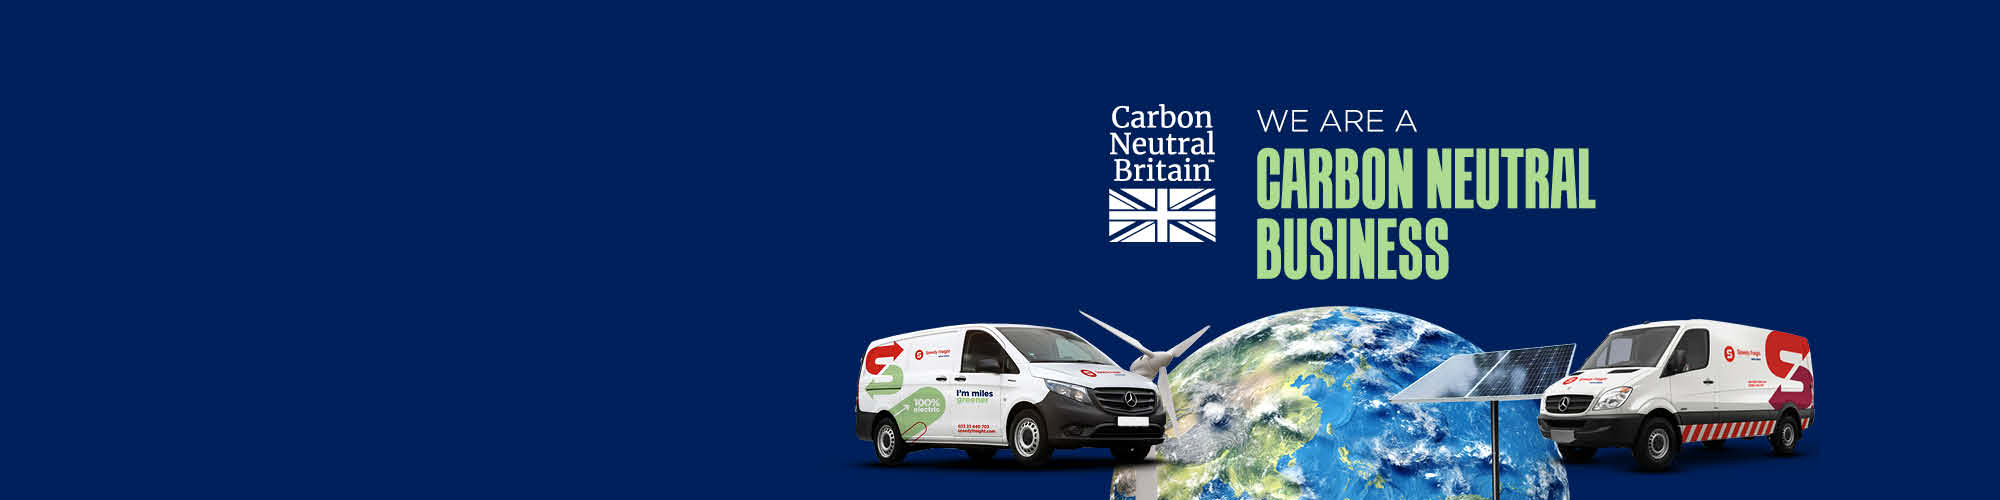 Speedy Freight Certified as a Carbon Neutral Business by Carbon Neutral Britain